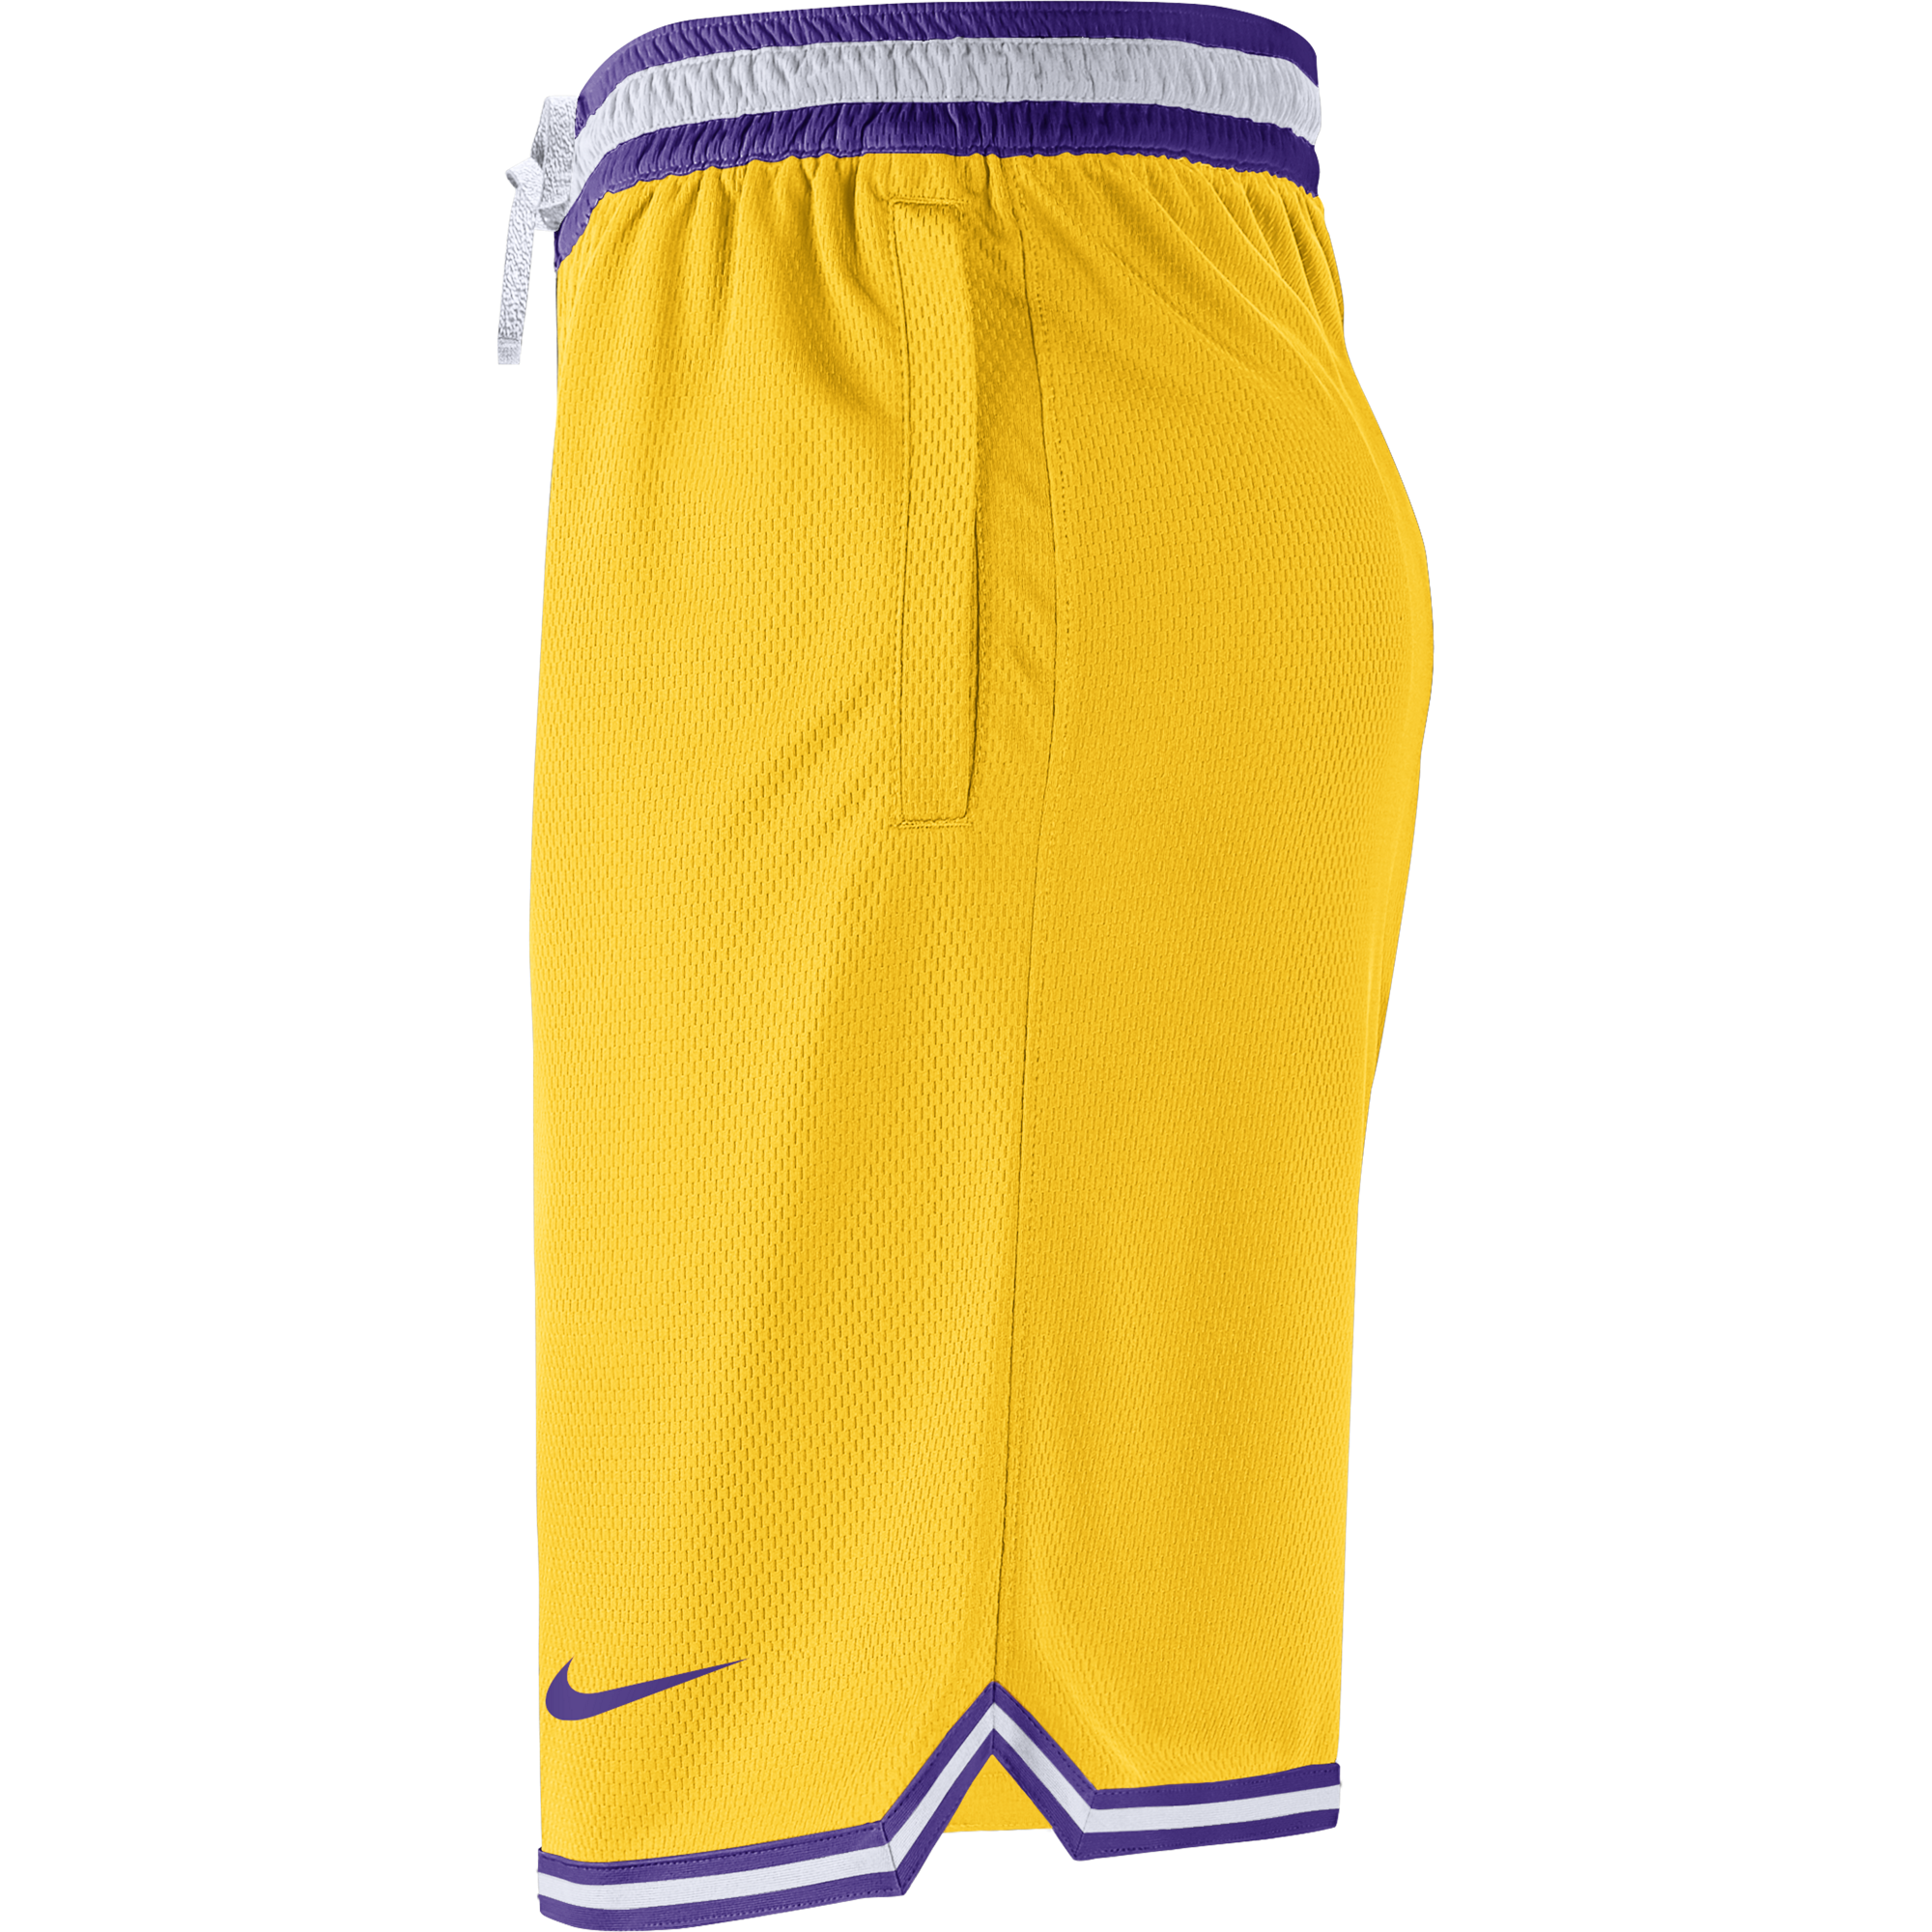 Golden State Warriors Authentic Nike Statement Shorts - sz 38 L NWT